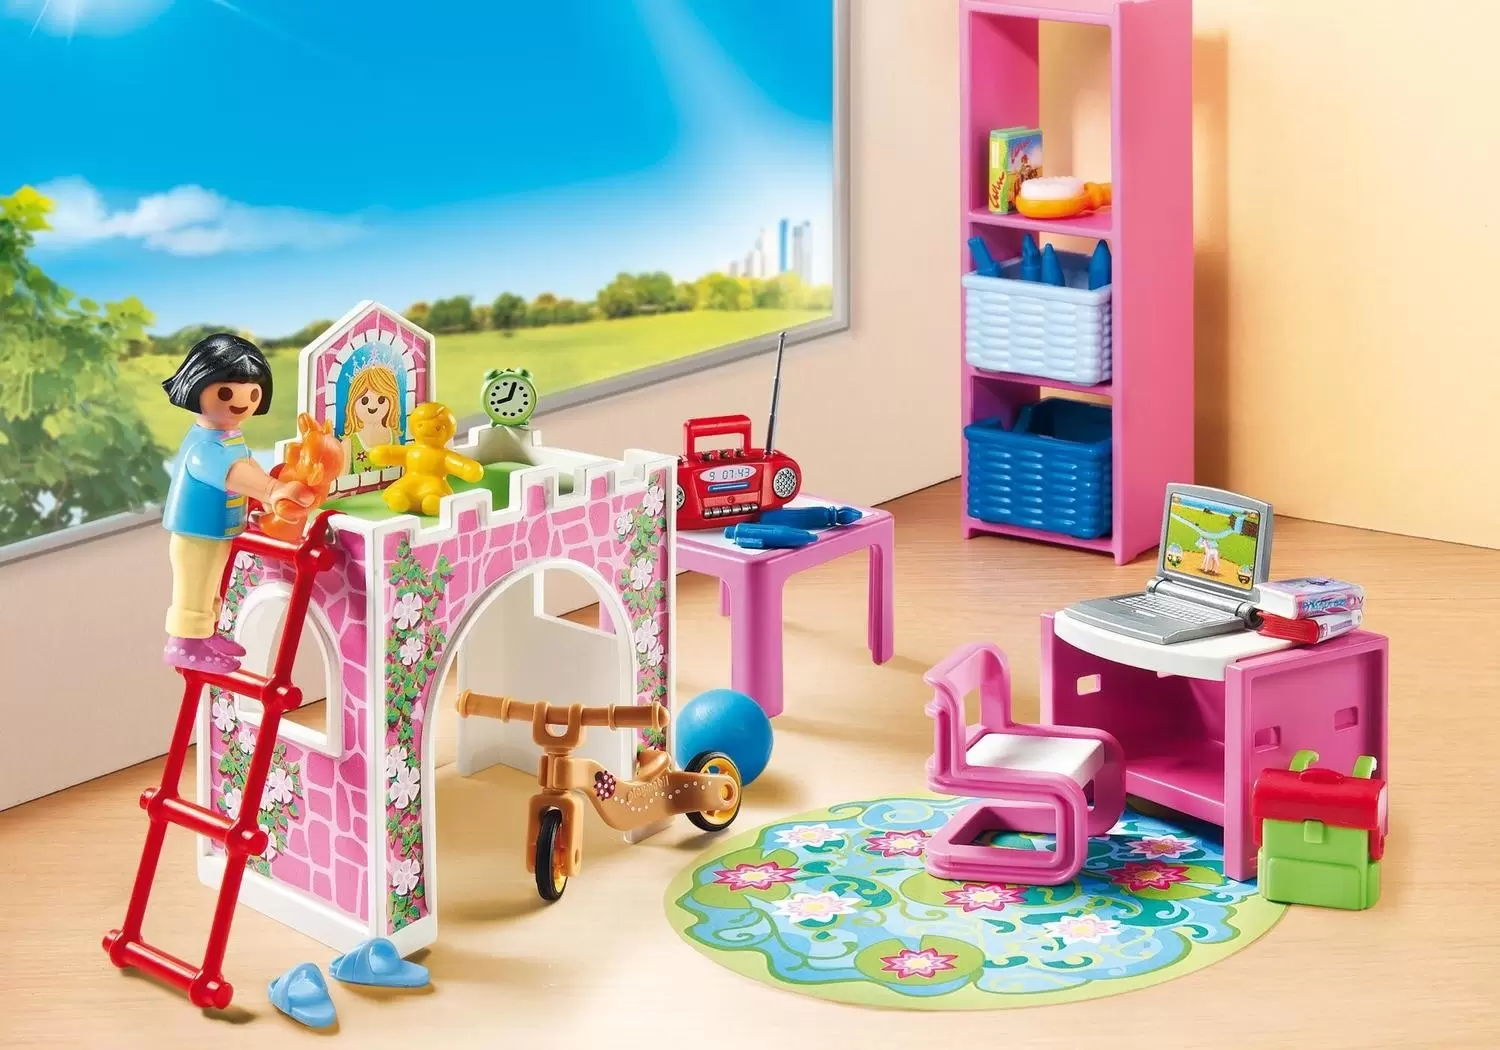 Playmobil Houses and Furniture - Room for child